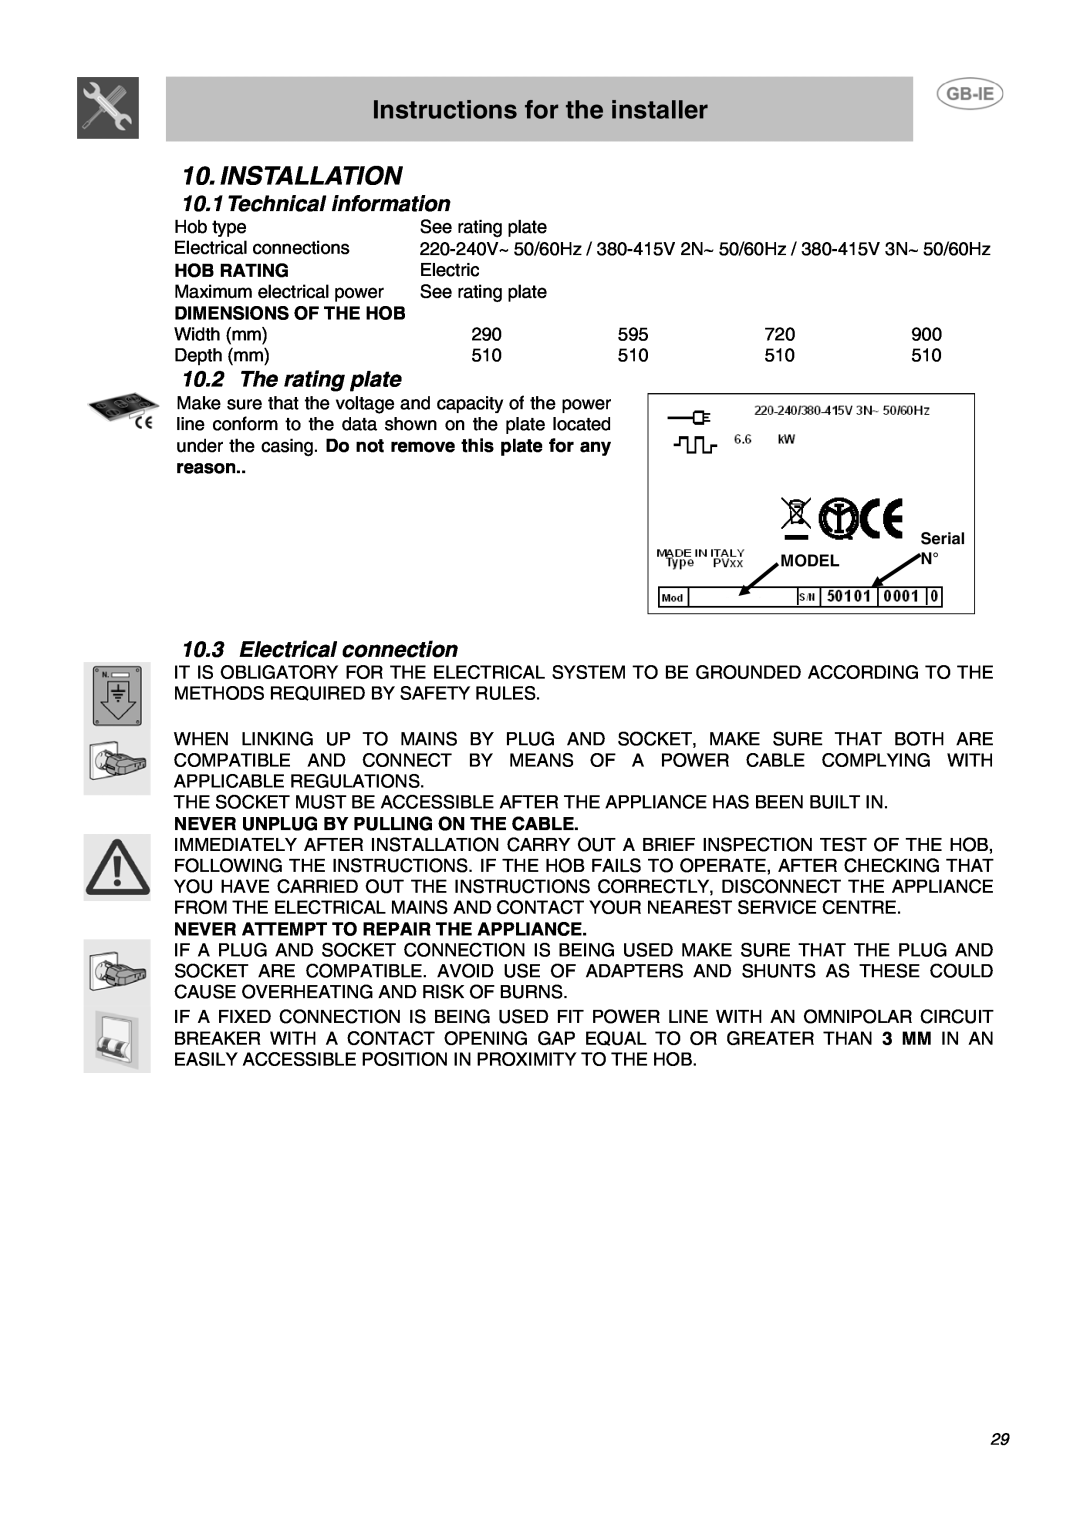 Smeg APL2640TC manual Instructions for the installer, Installation, Technical information, The rating plate, Hob Rating 